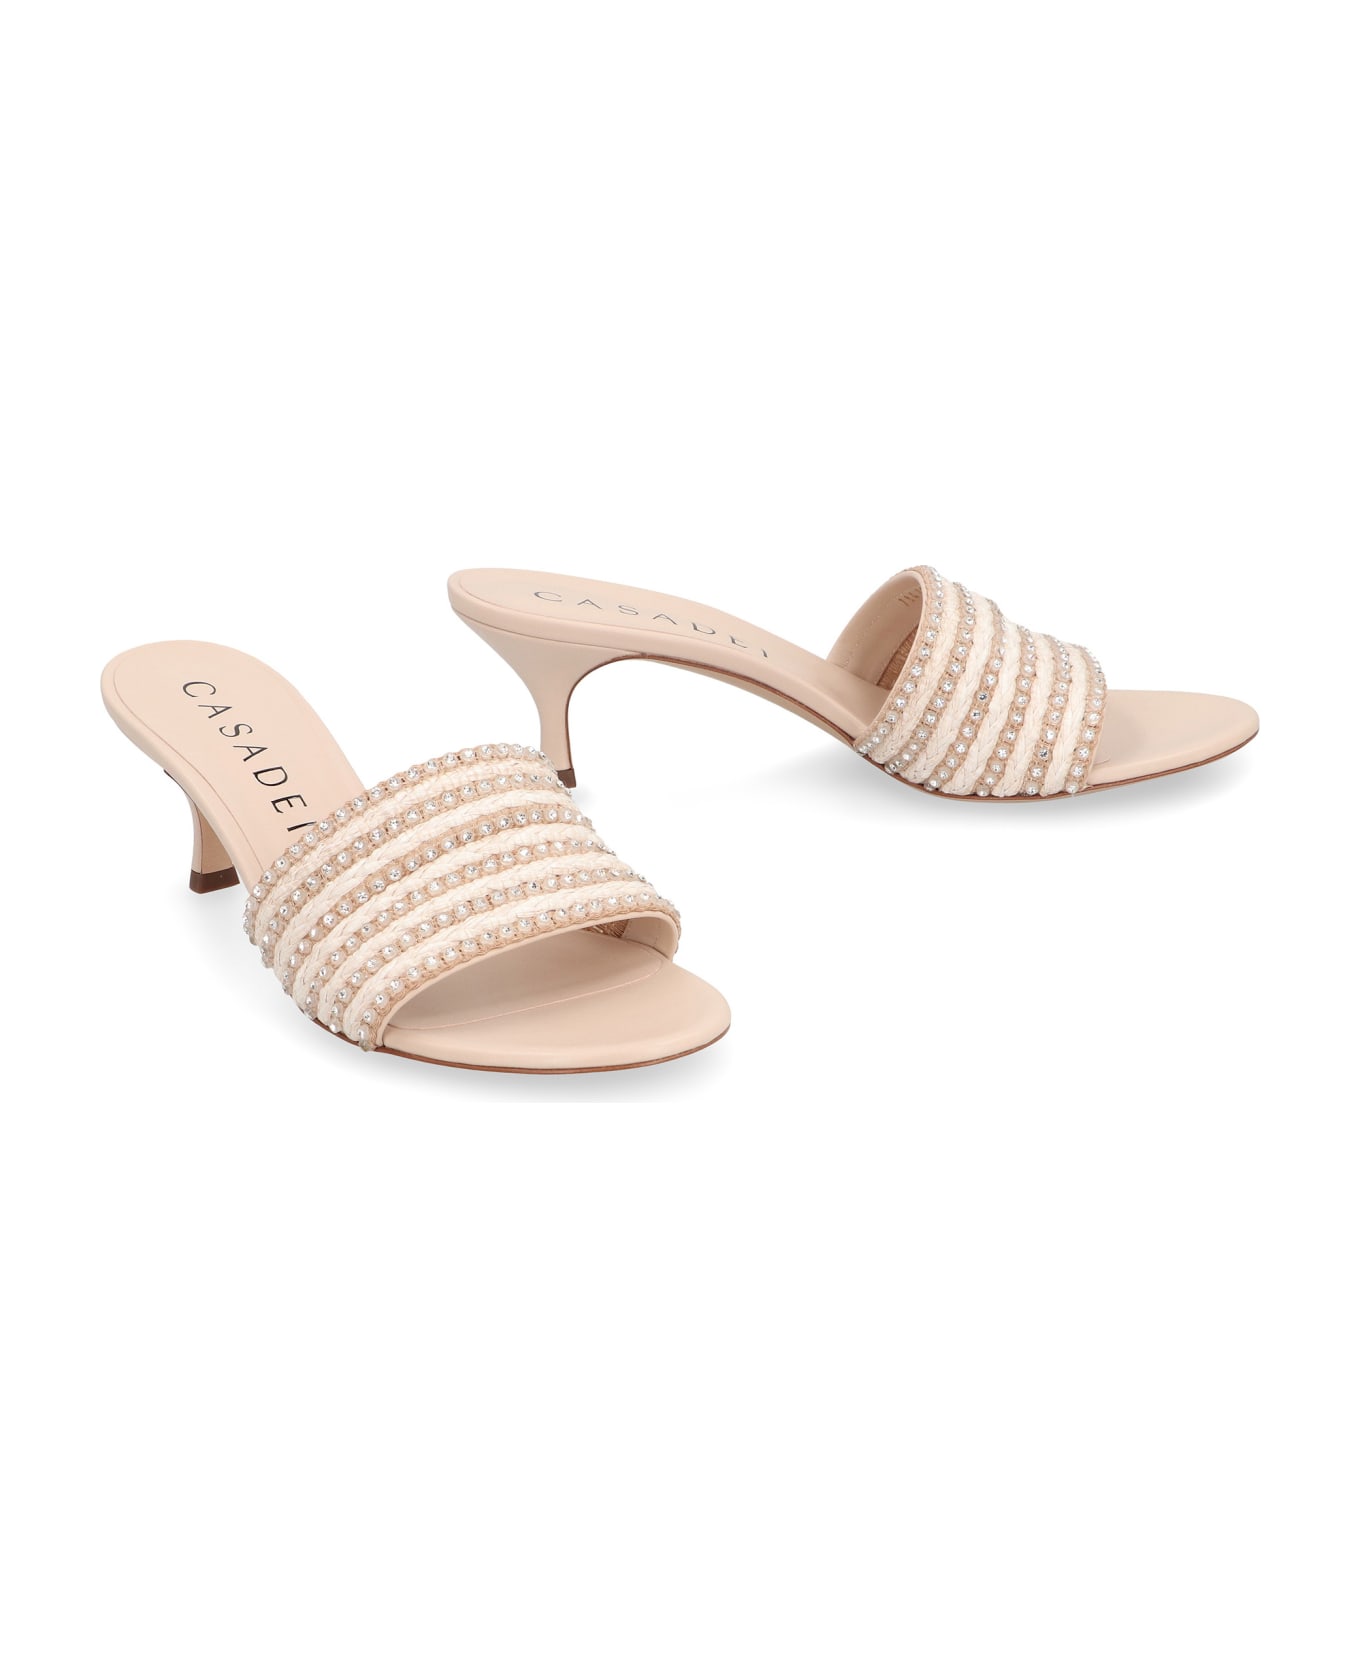 Casadei Limelight Leather Mules - Pale pink